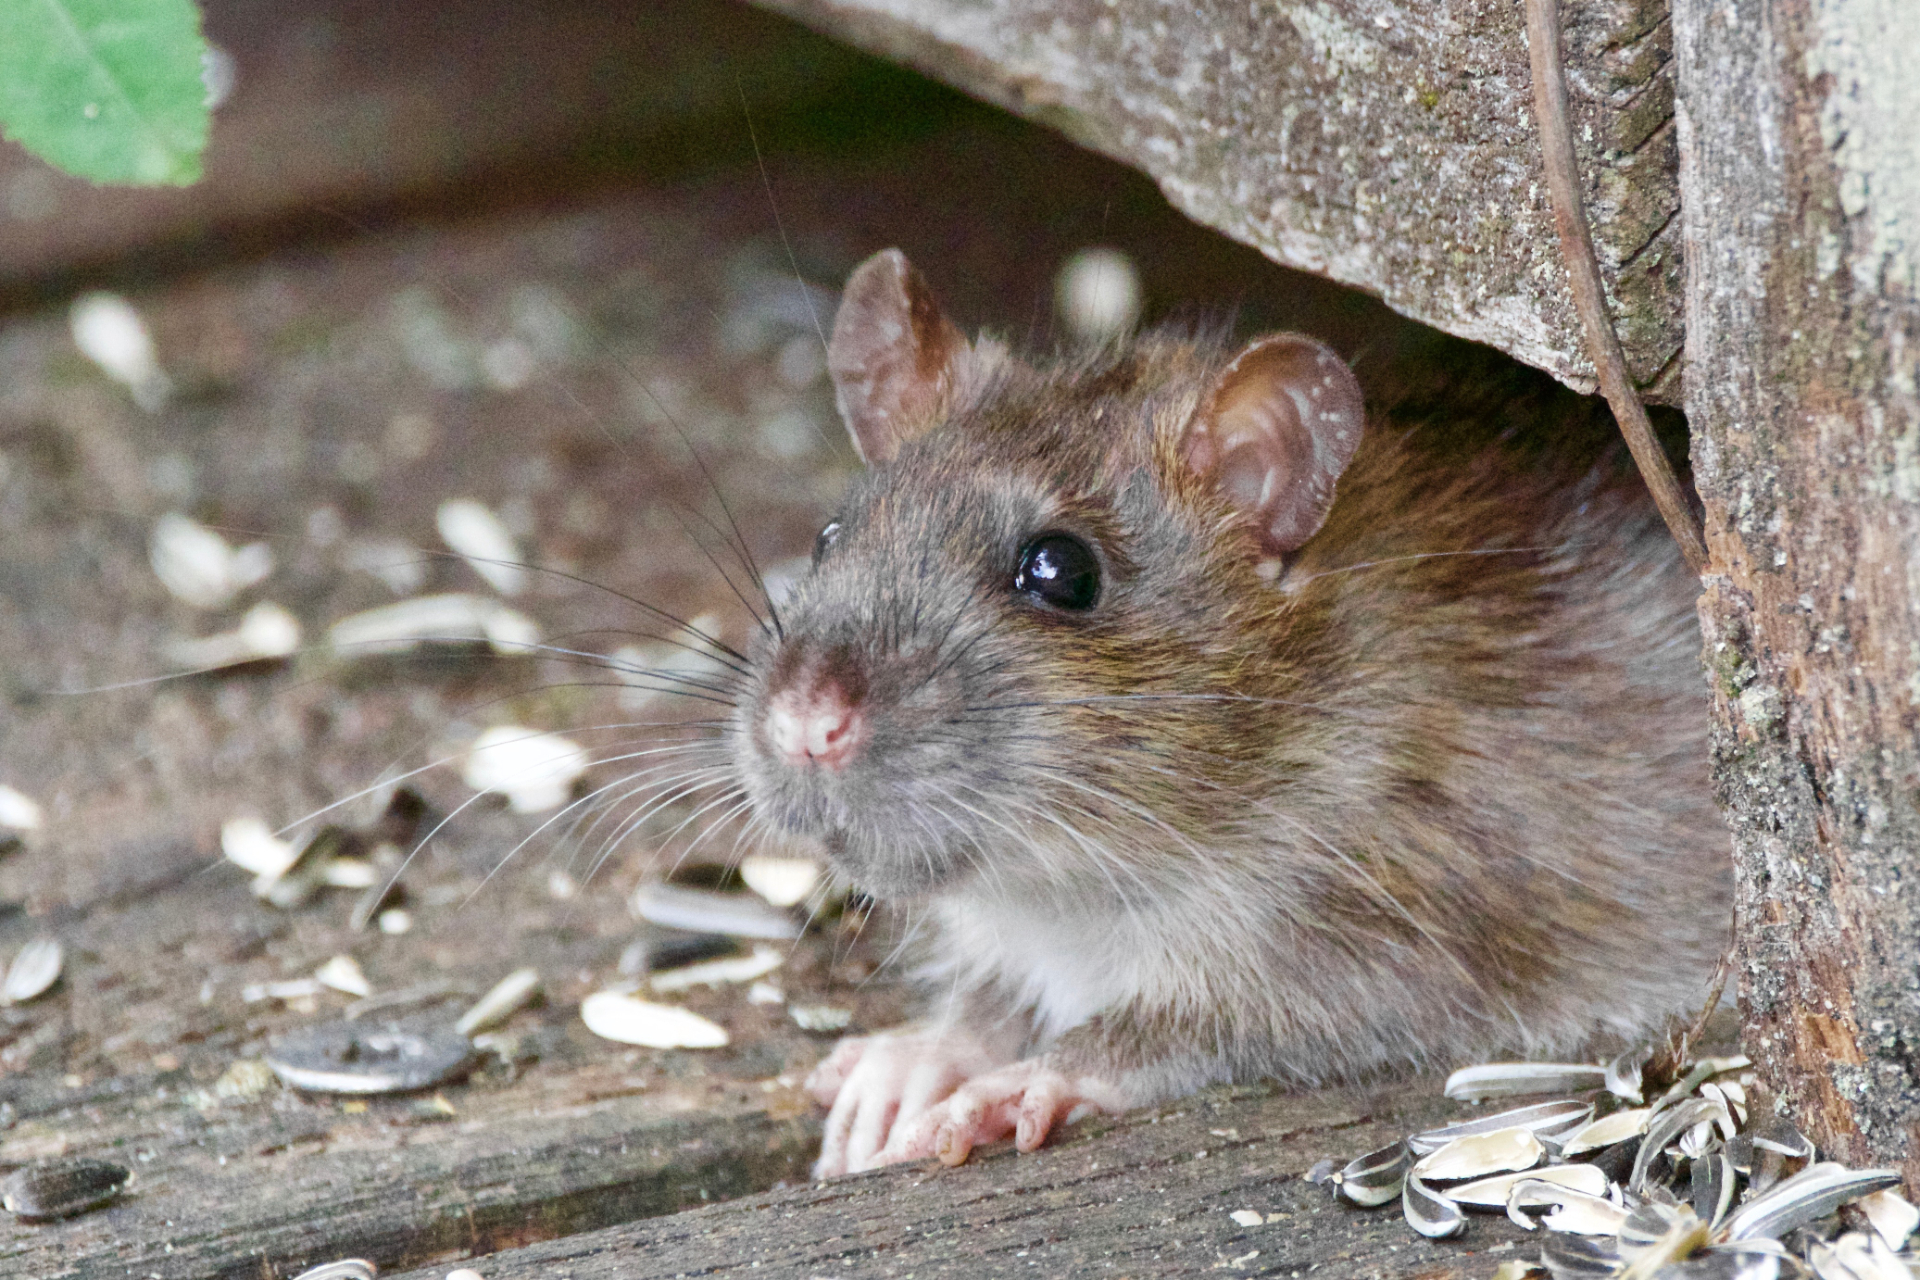 WHAT DRAWS MICE AND RATS INTO YOUR HOME?